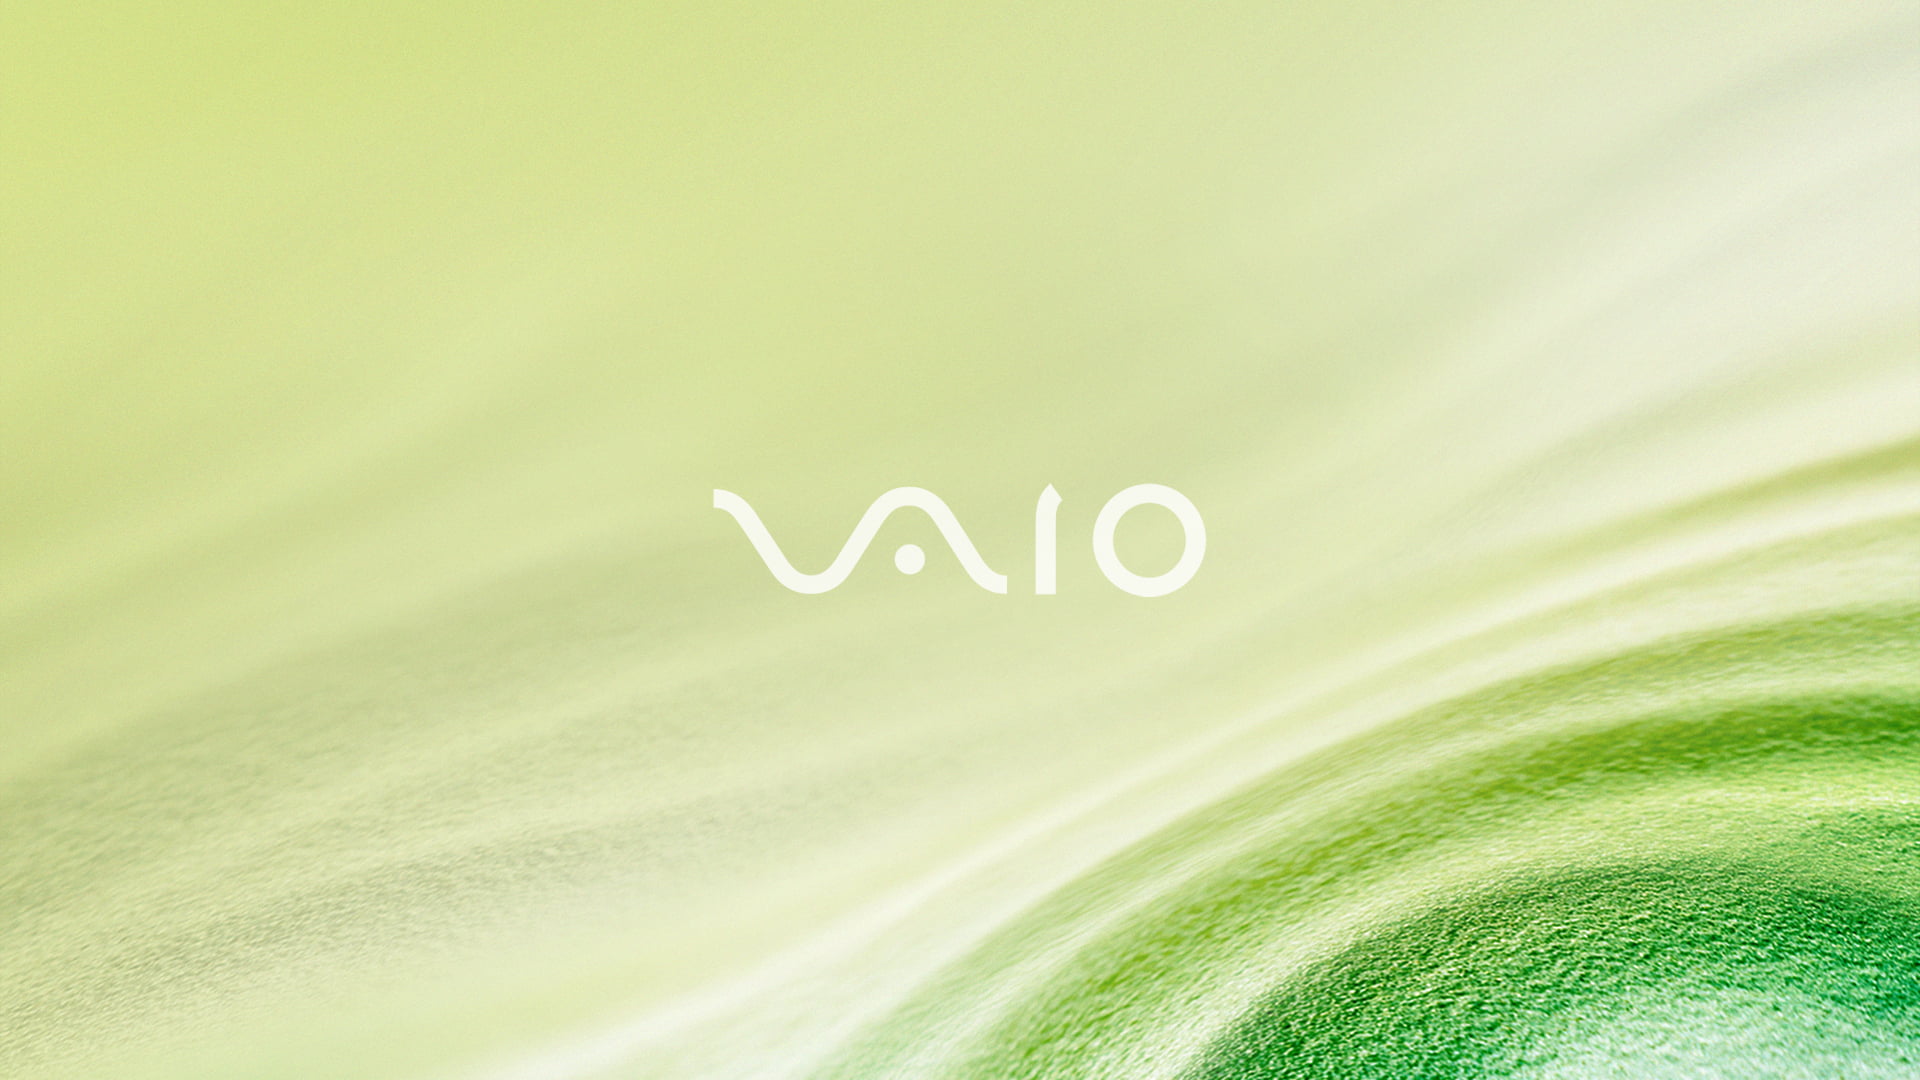 Sony VAIO logo, background, abstract, green color, no people